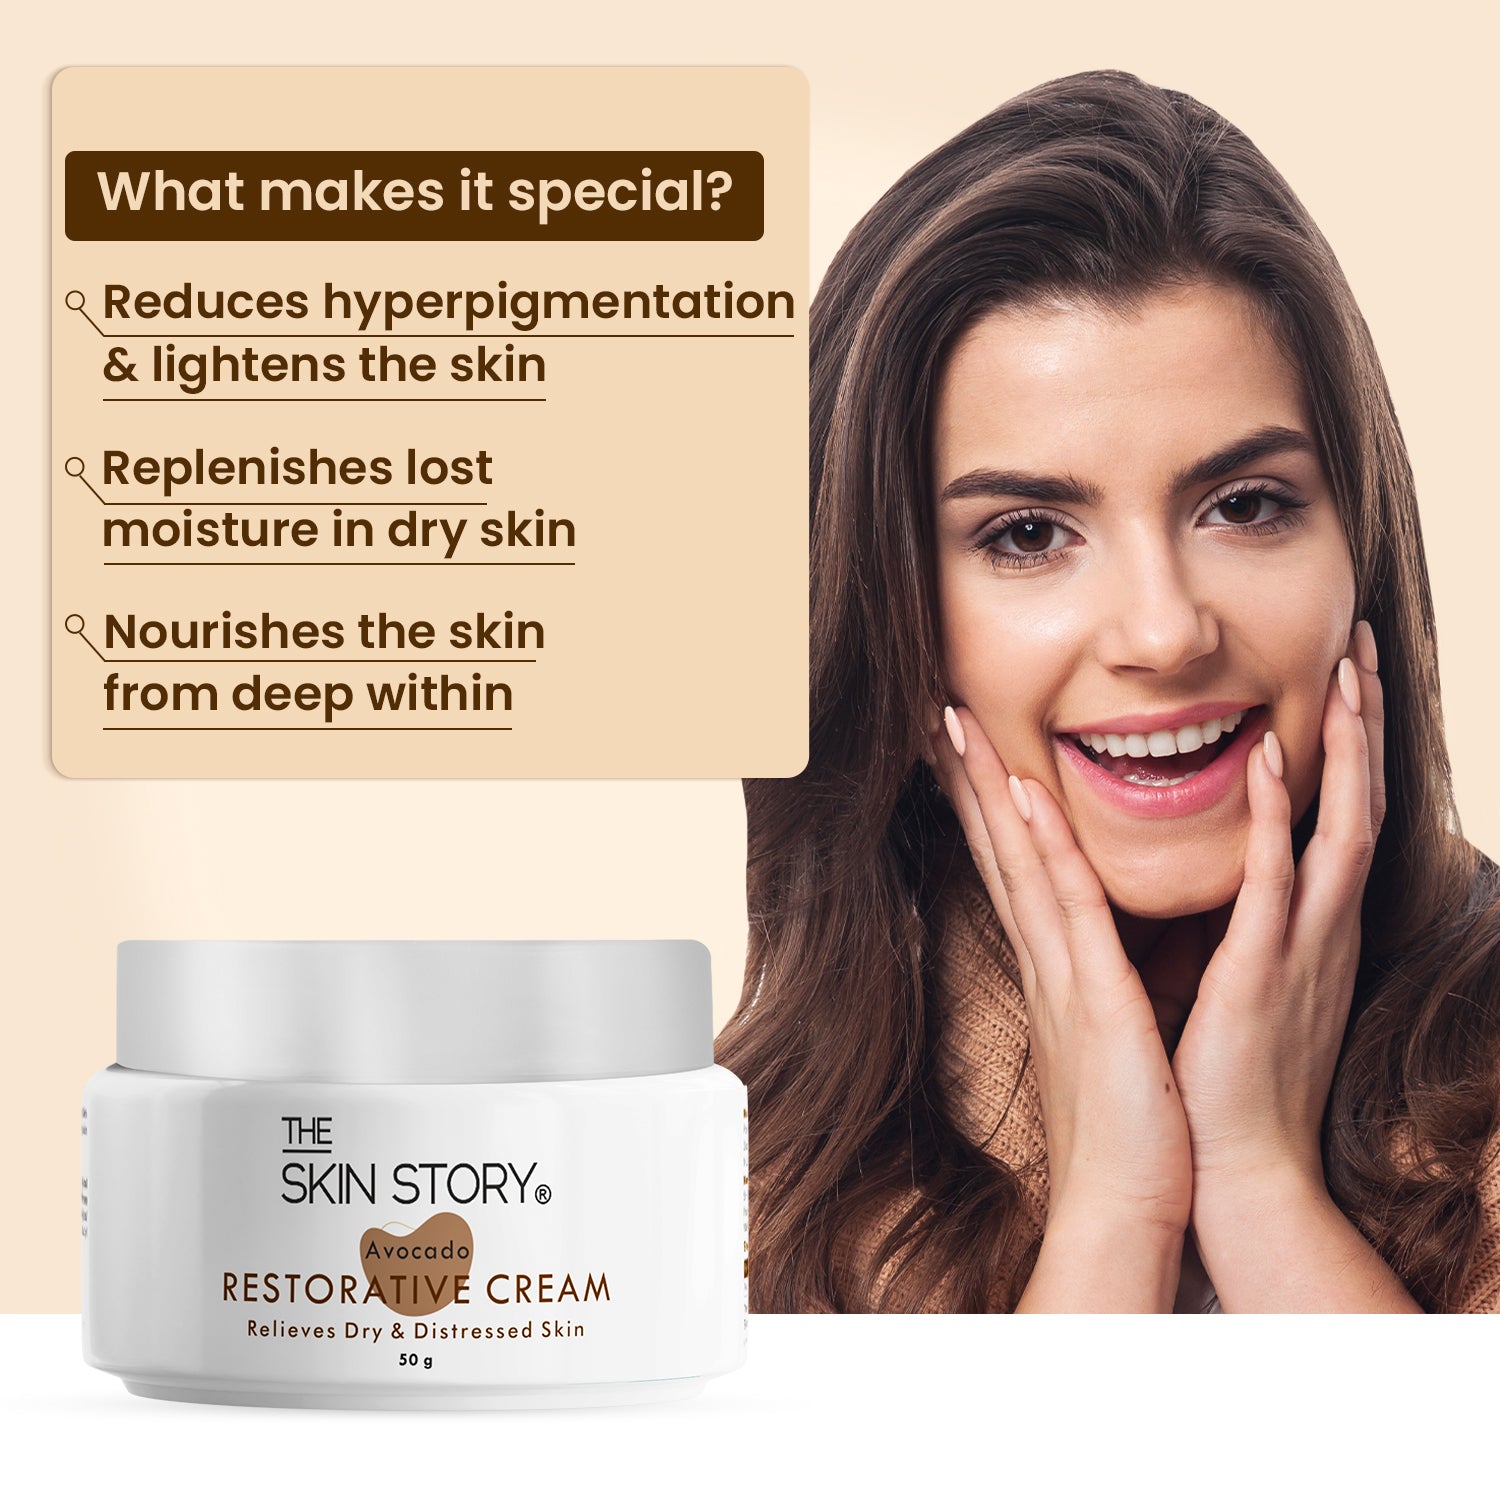 The Skin Story Moisturising Cream for Winters | Winter Care | Cream for Dry and Rough Skin | Enriched with Argan Oil | 50g